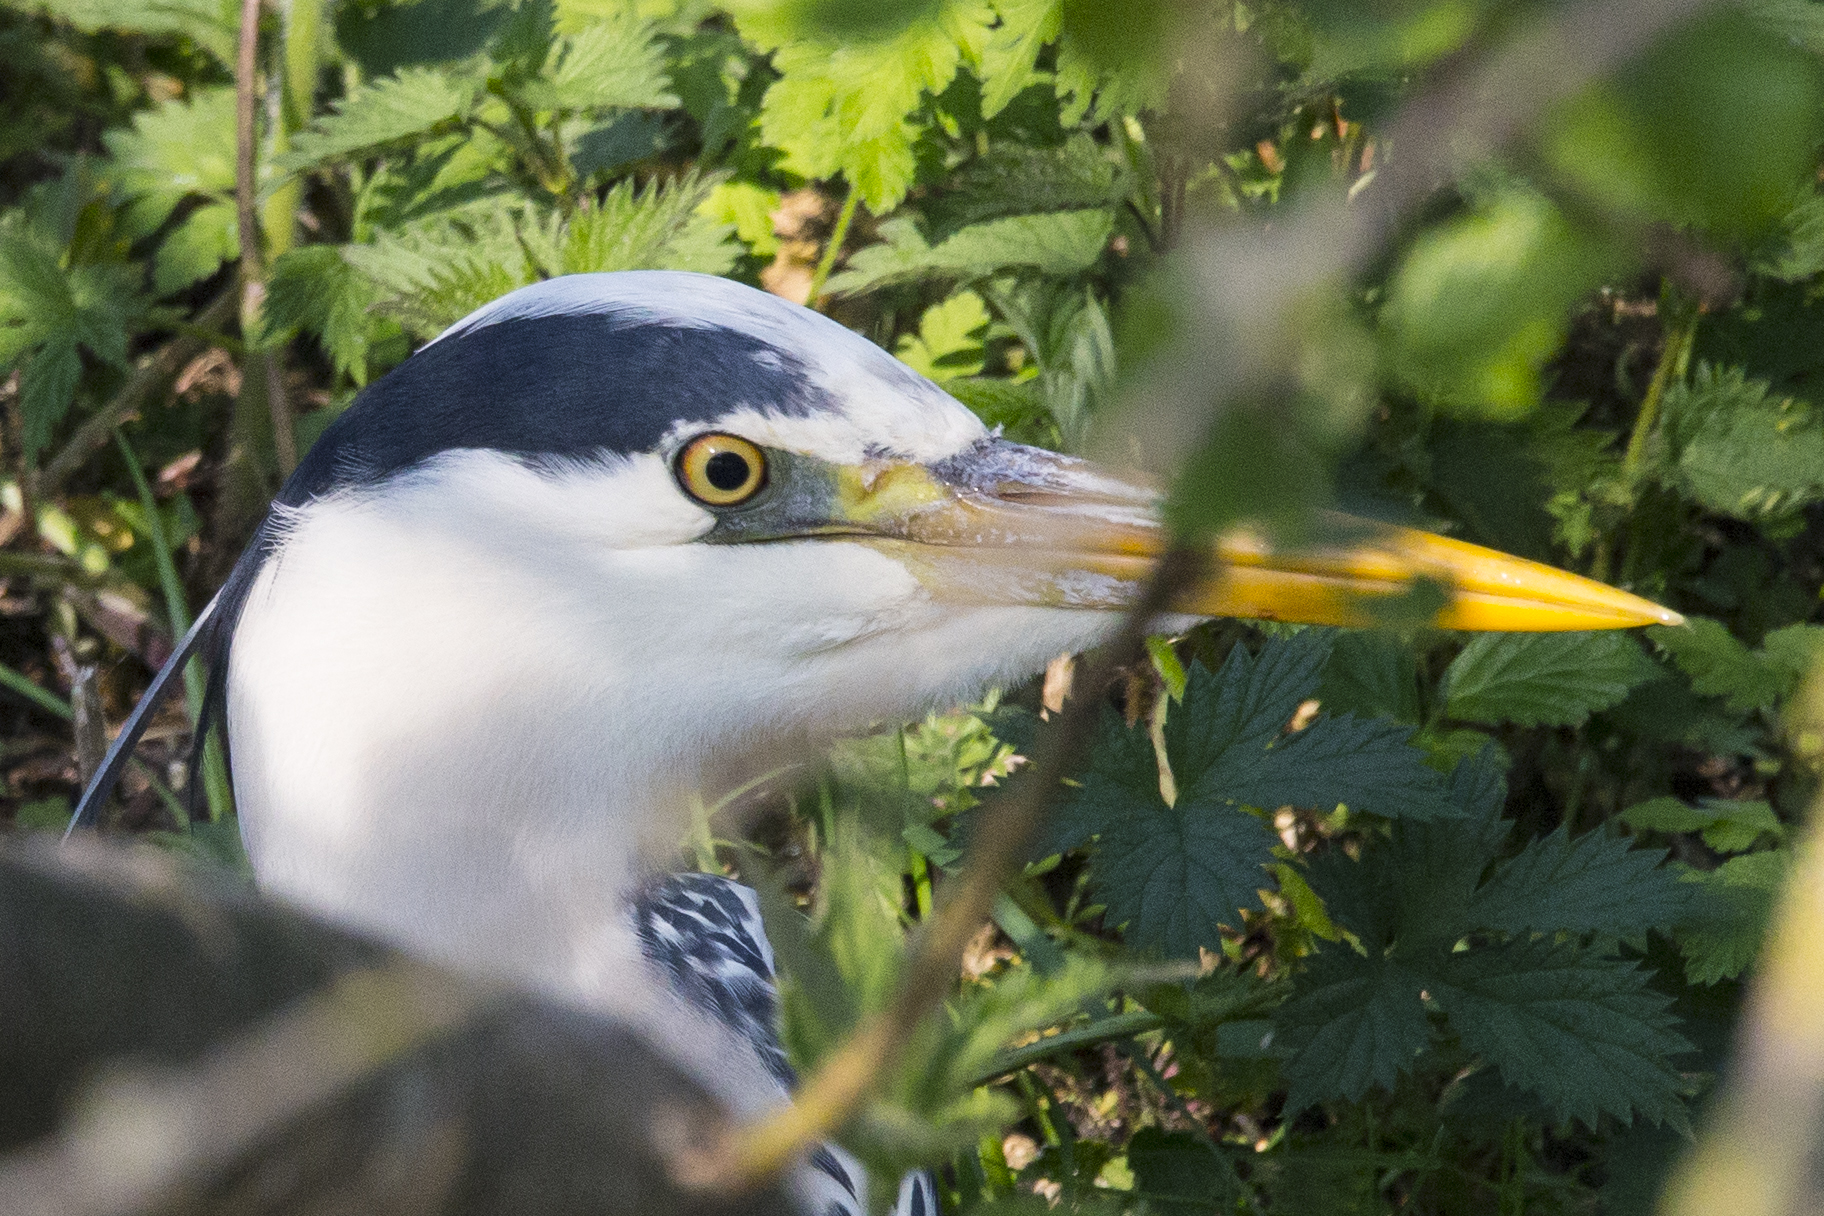 Gray heron in the undergrowth